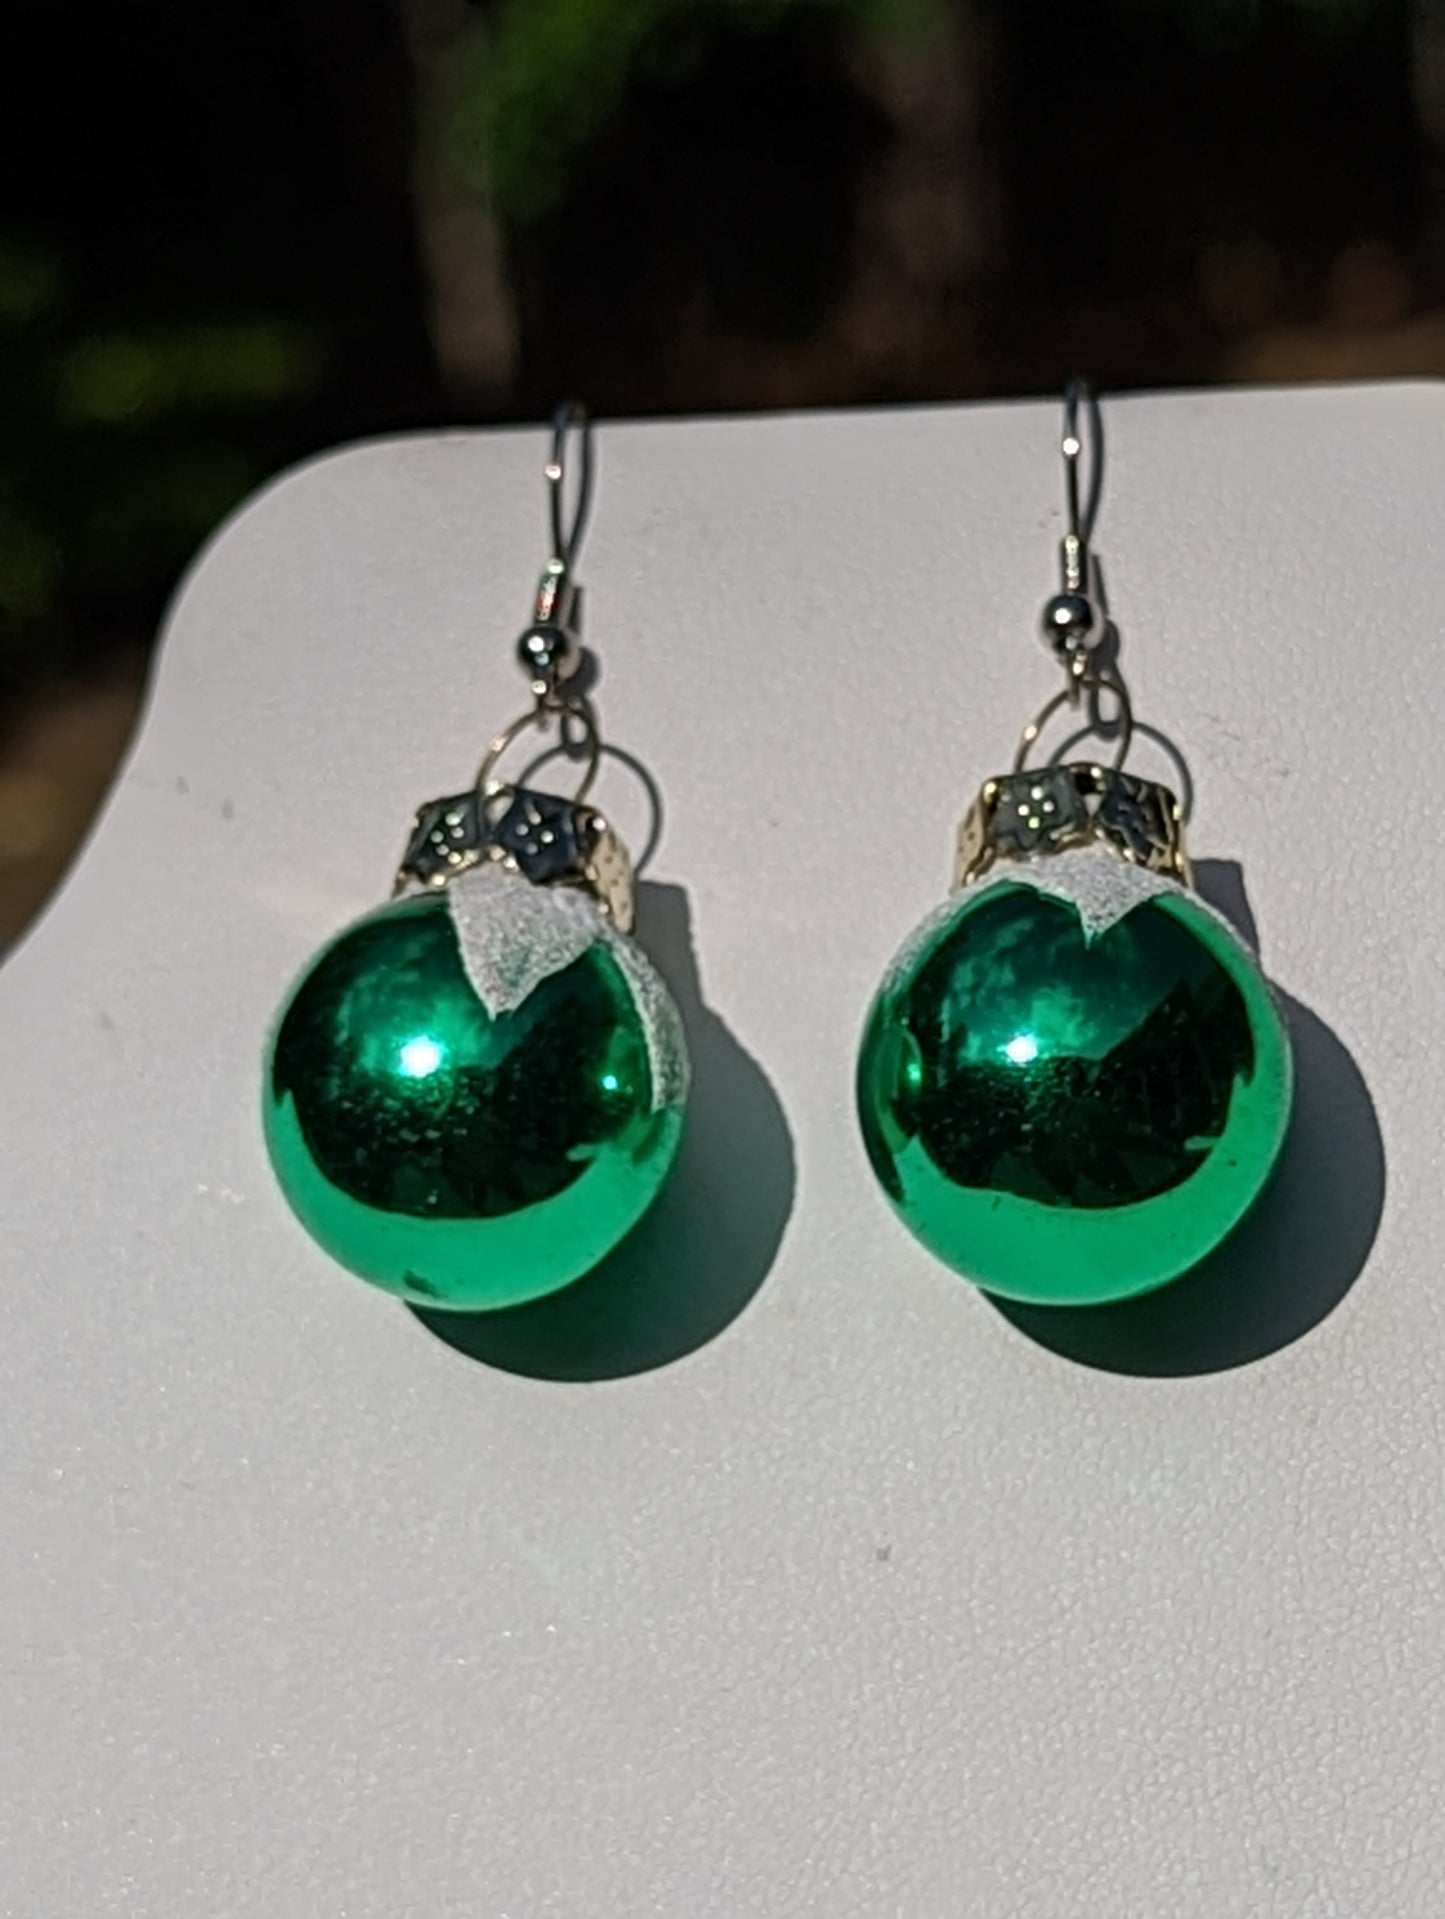 Vintage Round Green Christmas Ornament Earrings